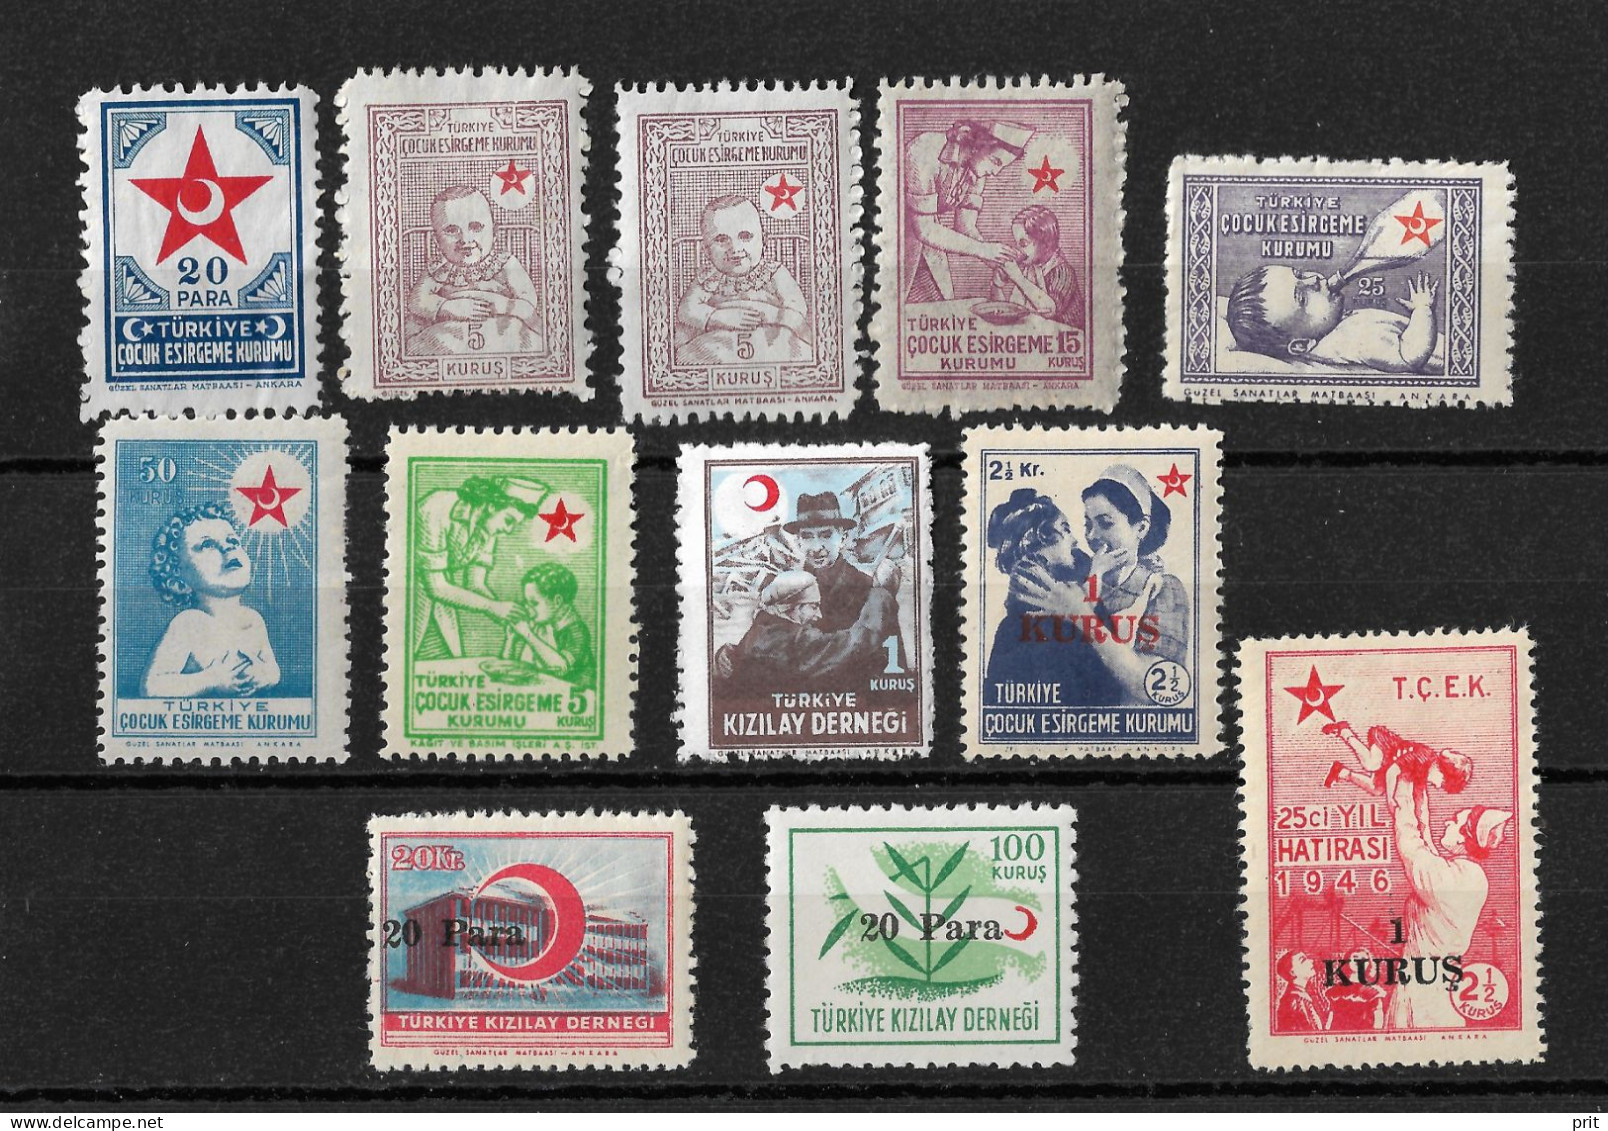 Turkey 1943-1955 Lot Of 12 Mint Stamps, For Children's Aid, Red Crescent Edition. MH/MLH/MNH - Unused Stamps